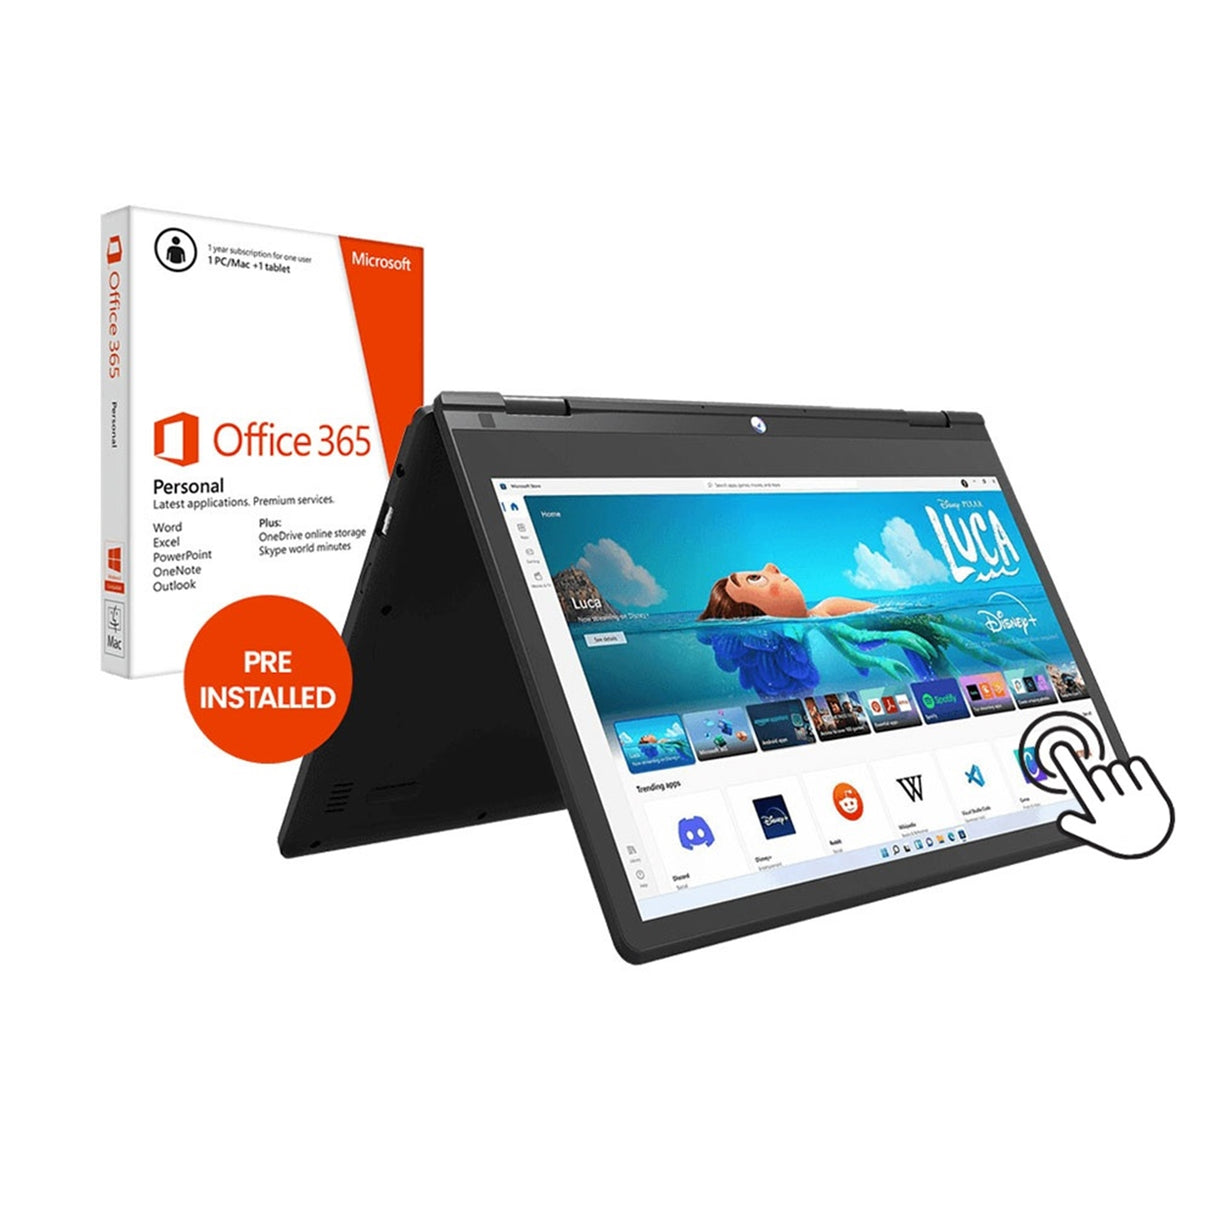 Geo GeoFlex 2-in-1 Touchscreen Laptop, 11.6 Inch, Intel Celeron N4020 Processor, 4GB RAM, 64GB SSD, Windows 11 Home S with 1 Year Pre Installed Office 365 Personal